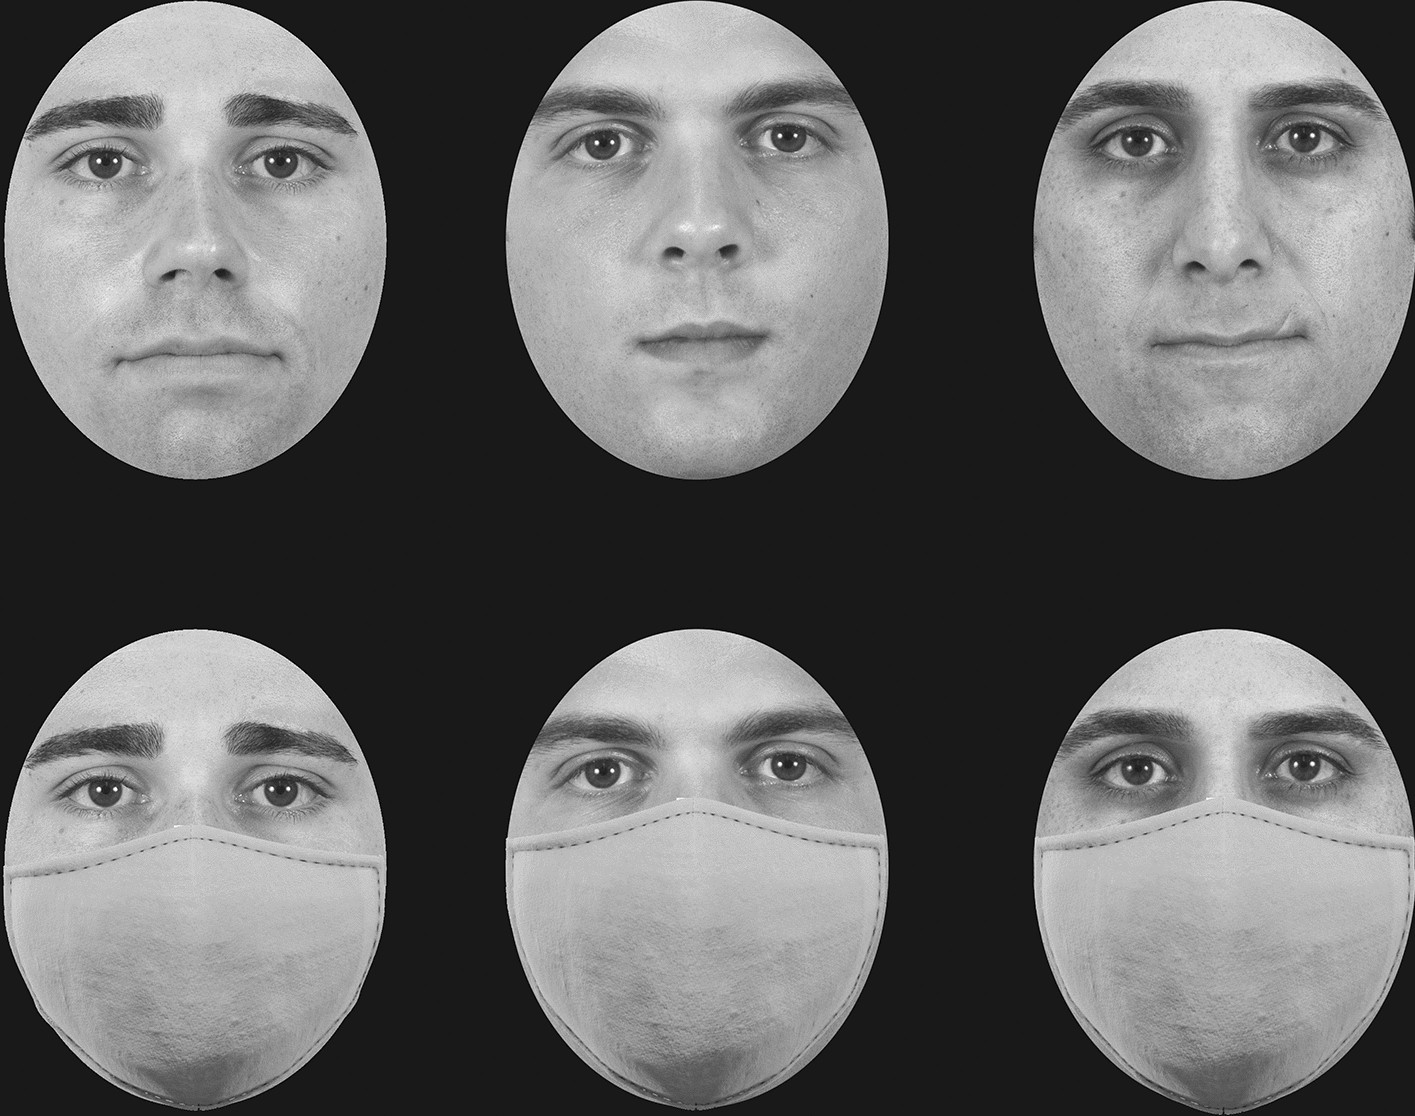 The COVID-19 pandemic masks the way people perceive faces | Scientific  Reports